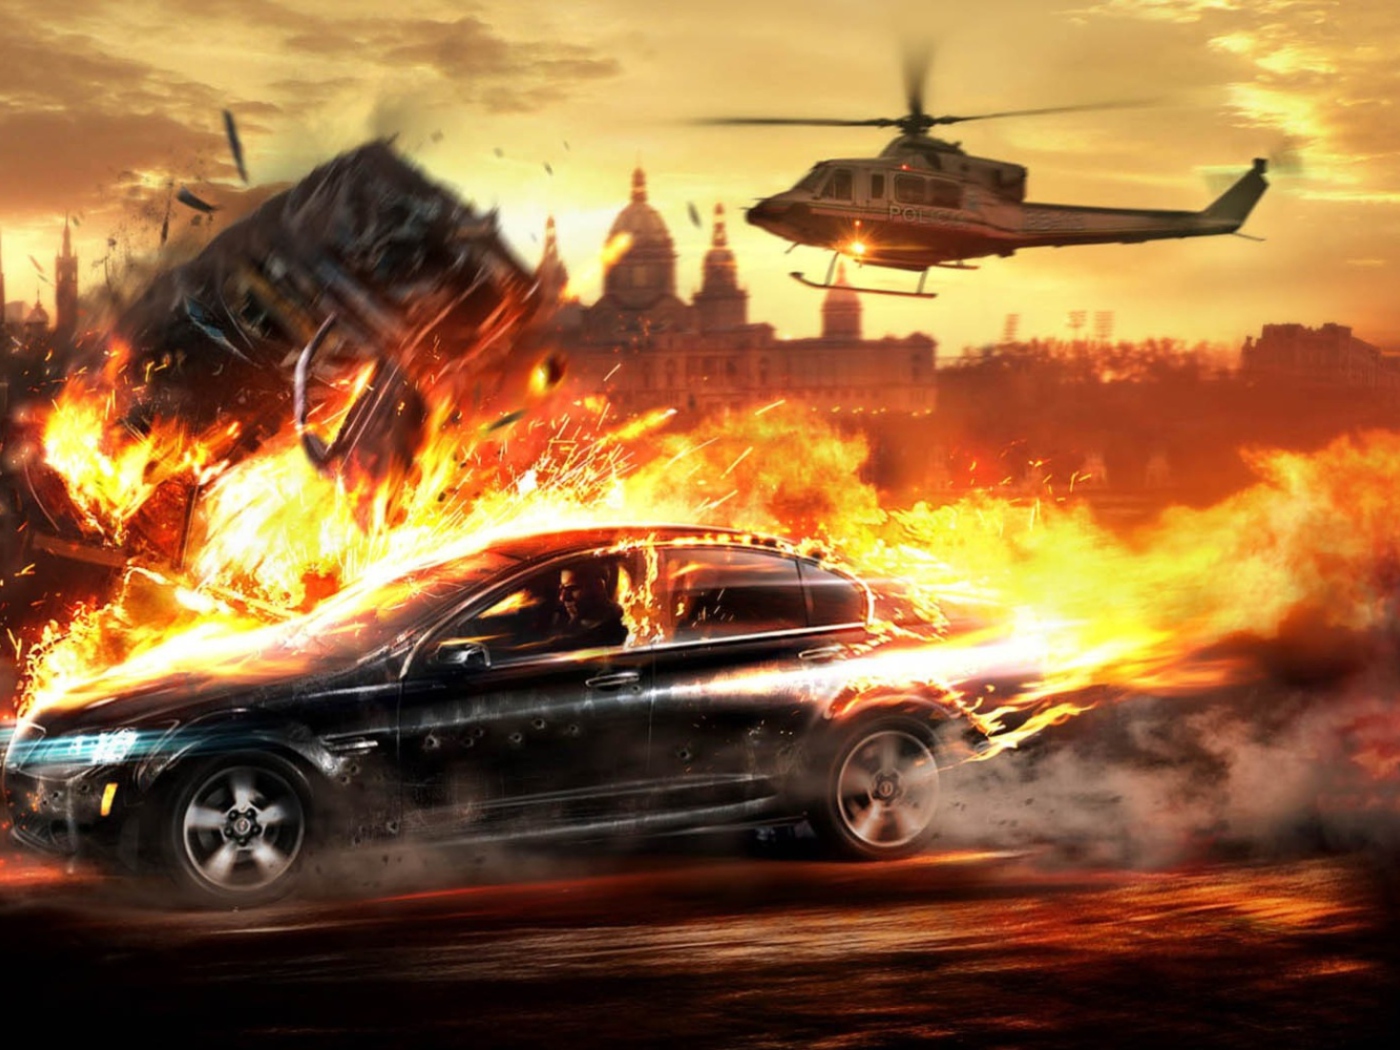 Car And Fire wallpaper 1400x1050